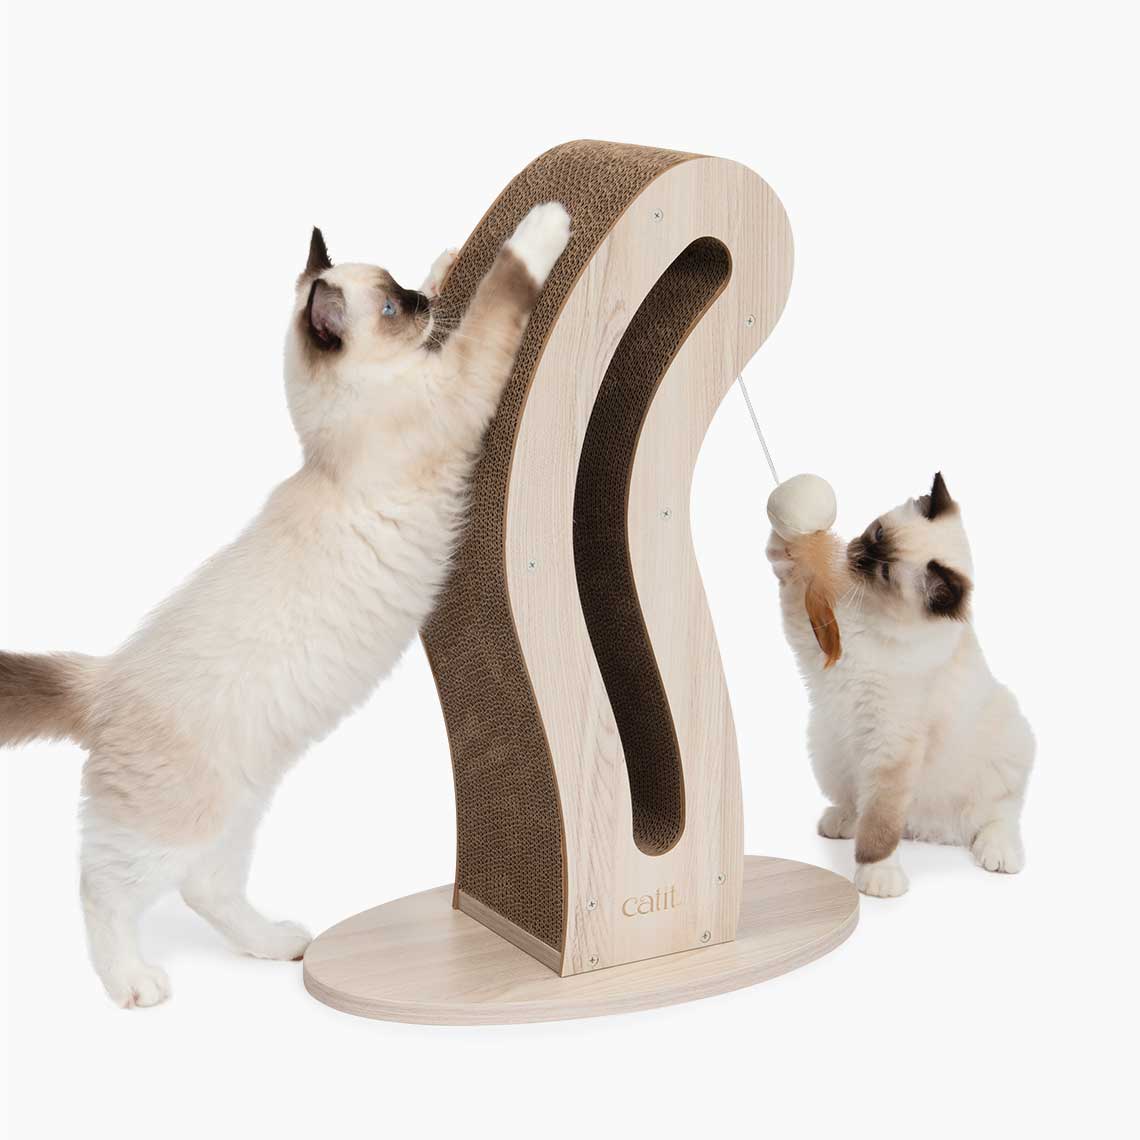 PIXI Tail scratcher with cats